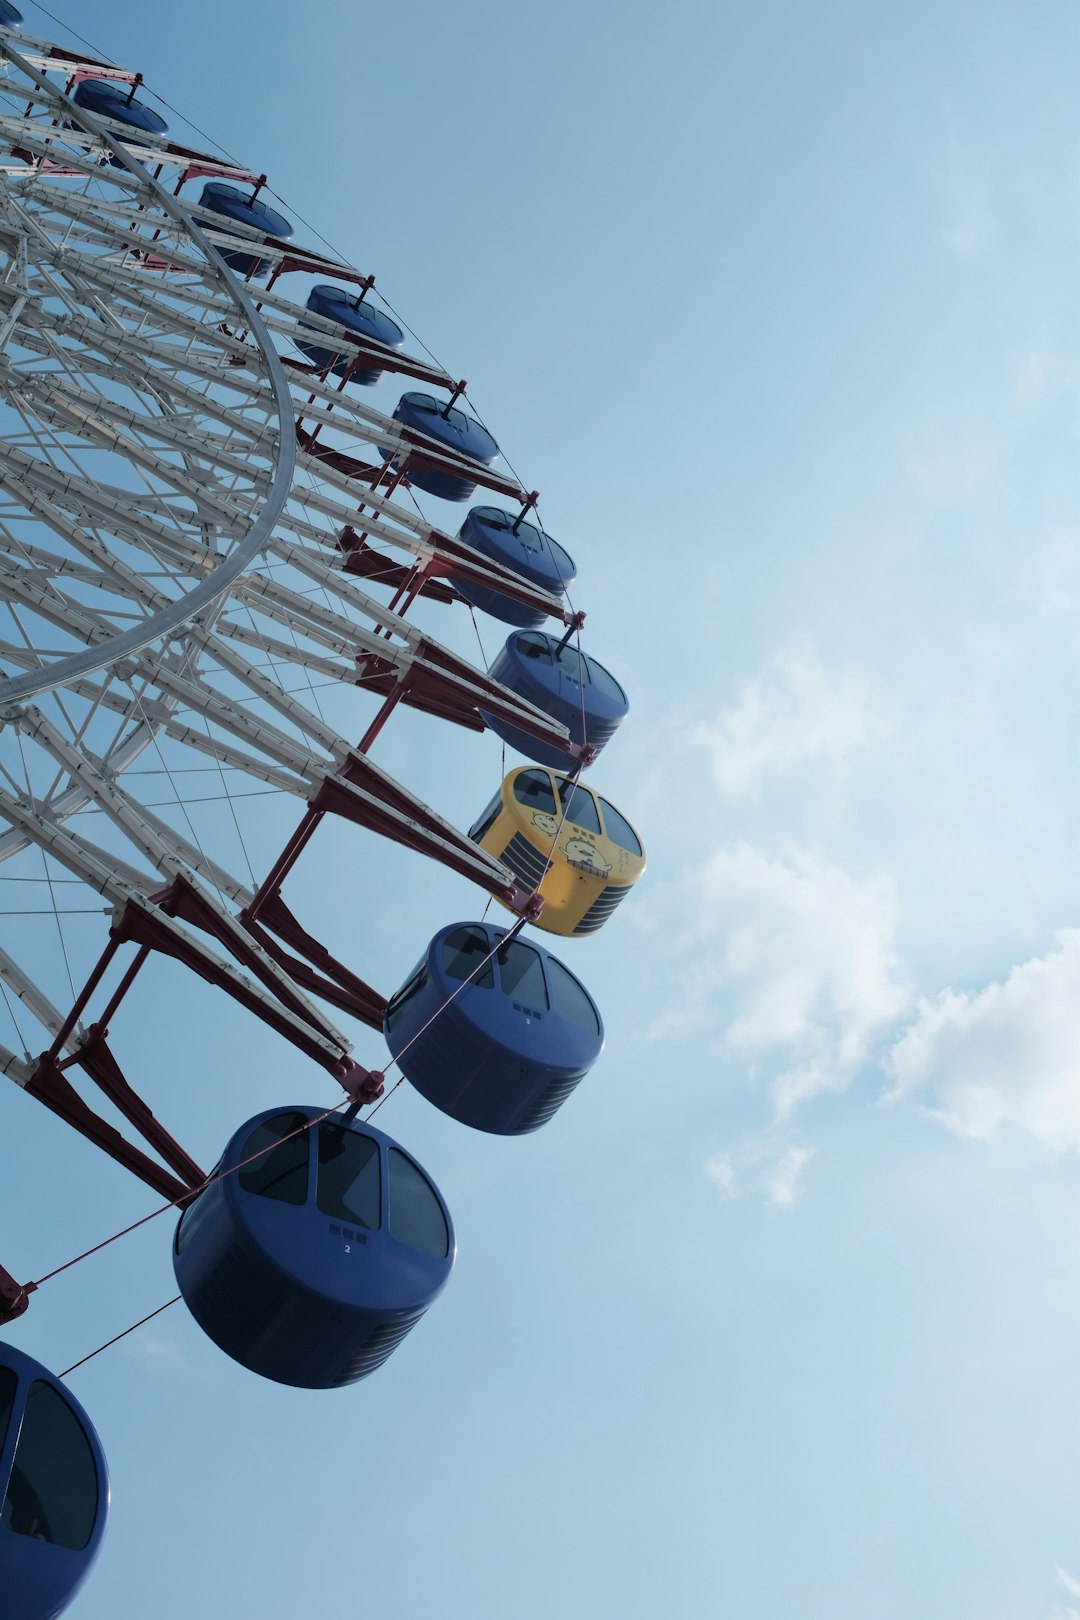 white and blue Ferris wheel during daytime